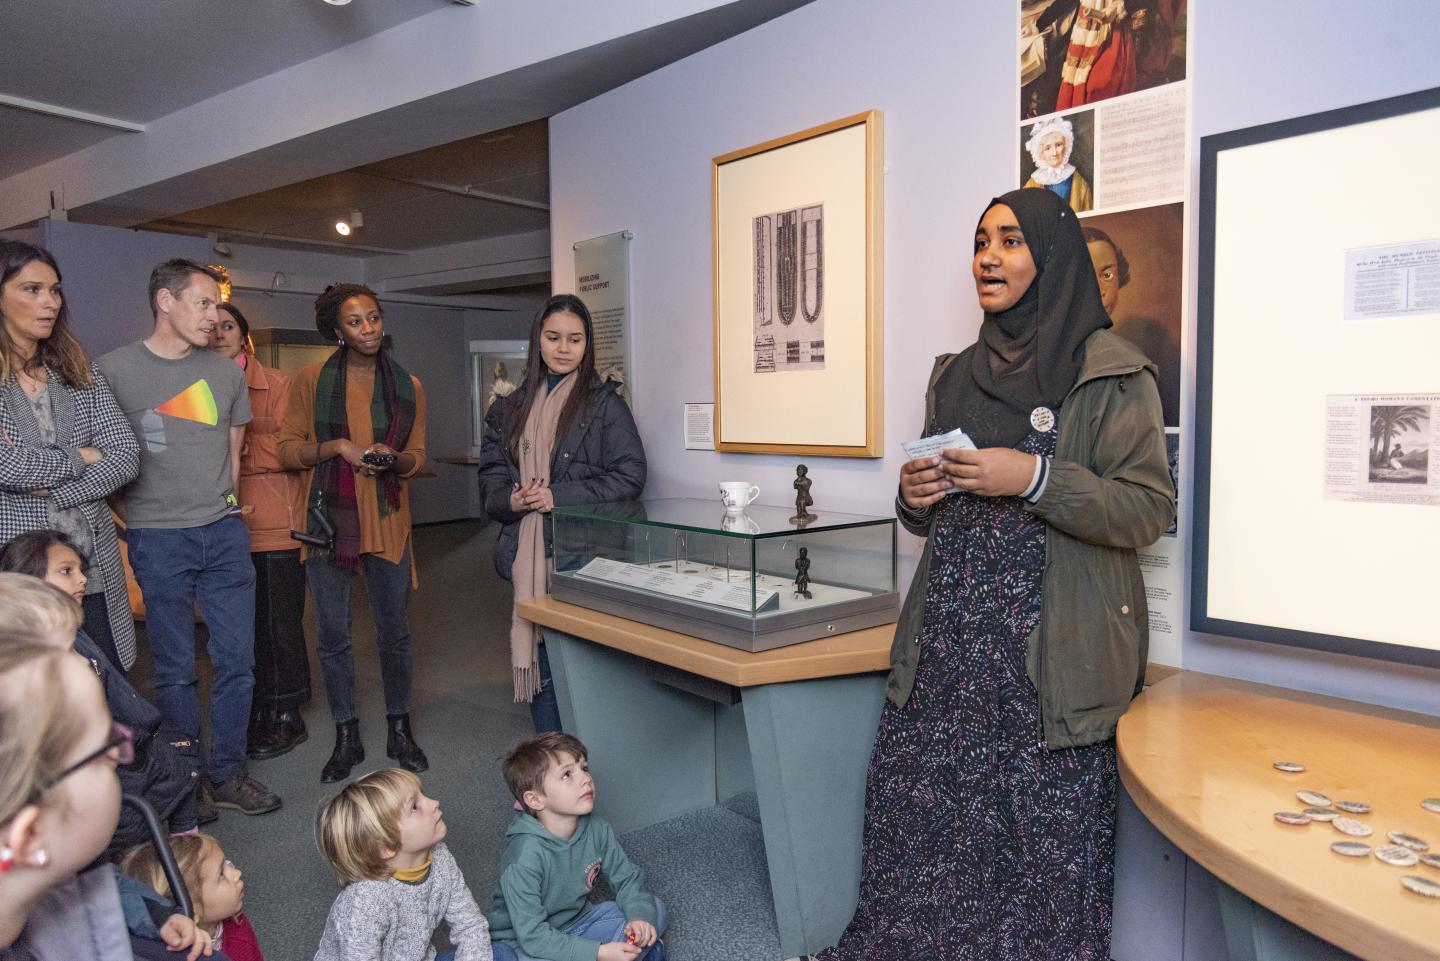 A young person delivering a tour in the galleries